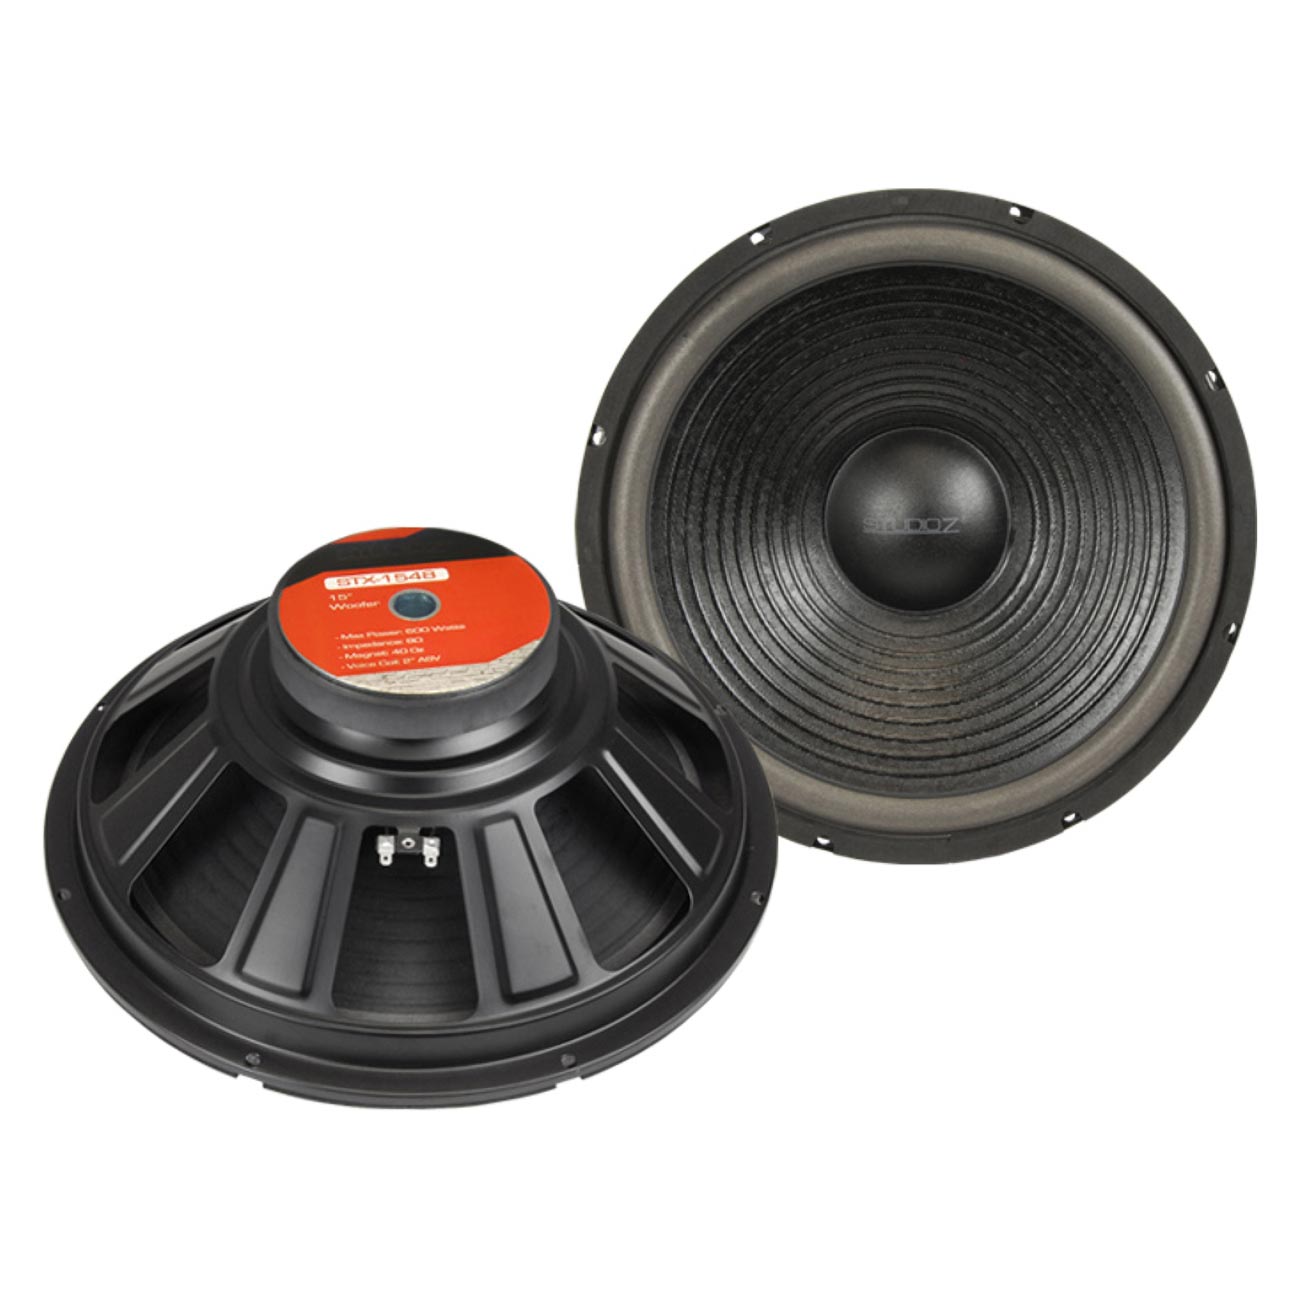 Studio Z 15" Replacement Woofer 600 Watts Max 8 ohm SVC